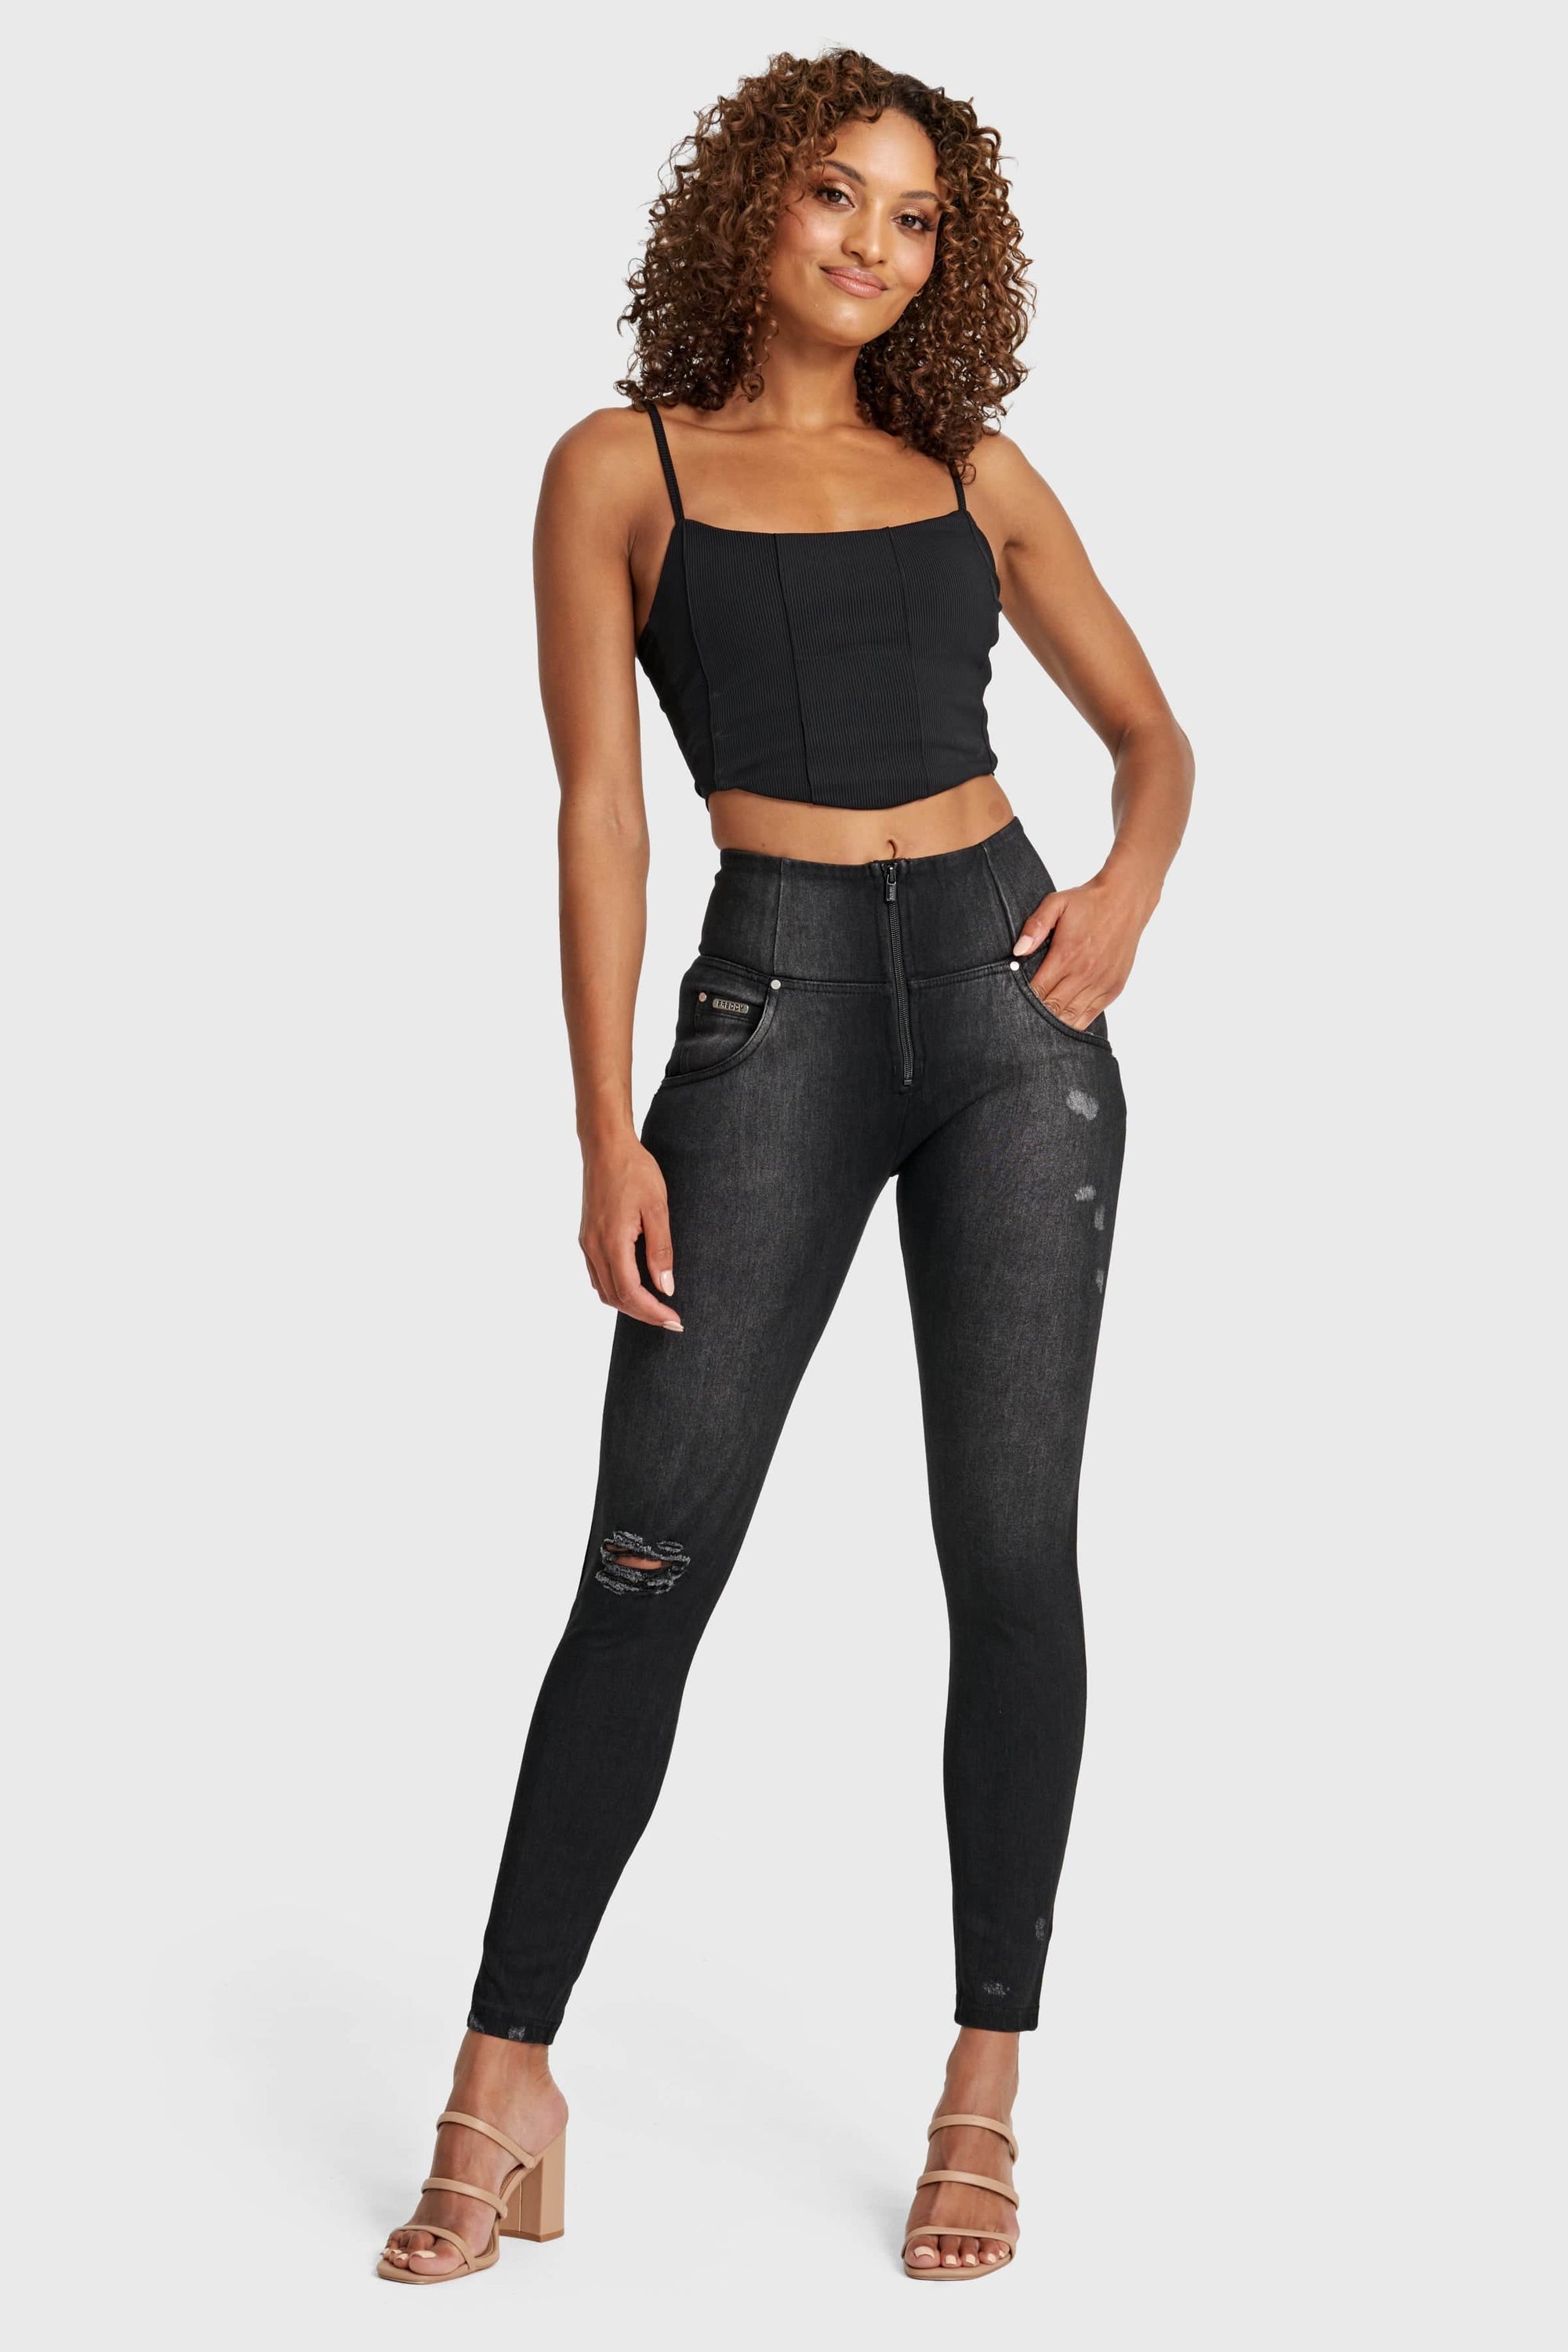 WR.UP® Snug Distressed Jeans - High Waisted - Full Length - Black + Black Stitching 7